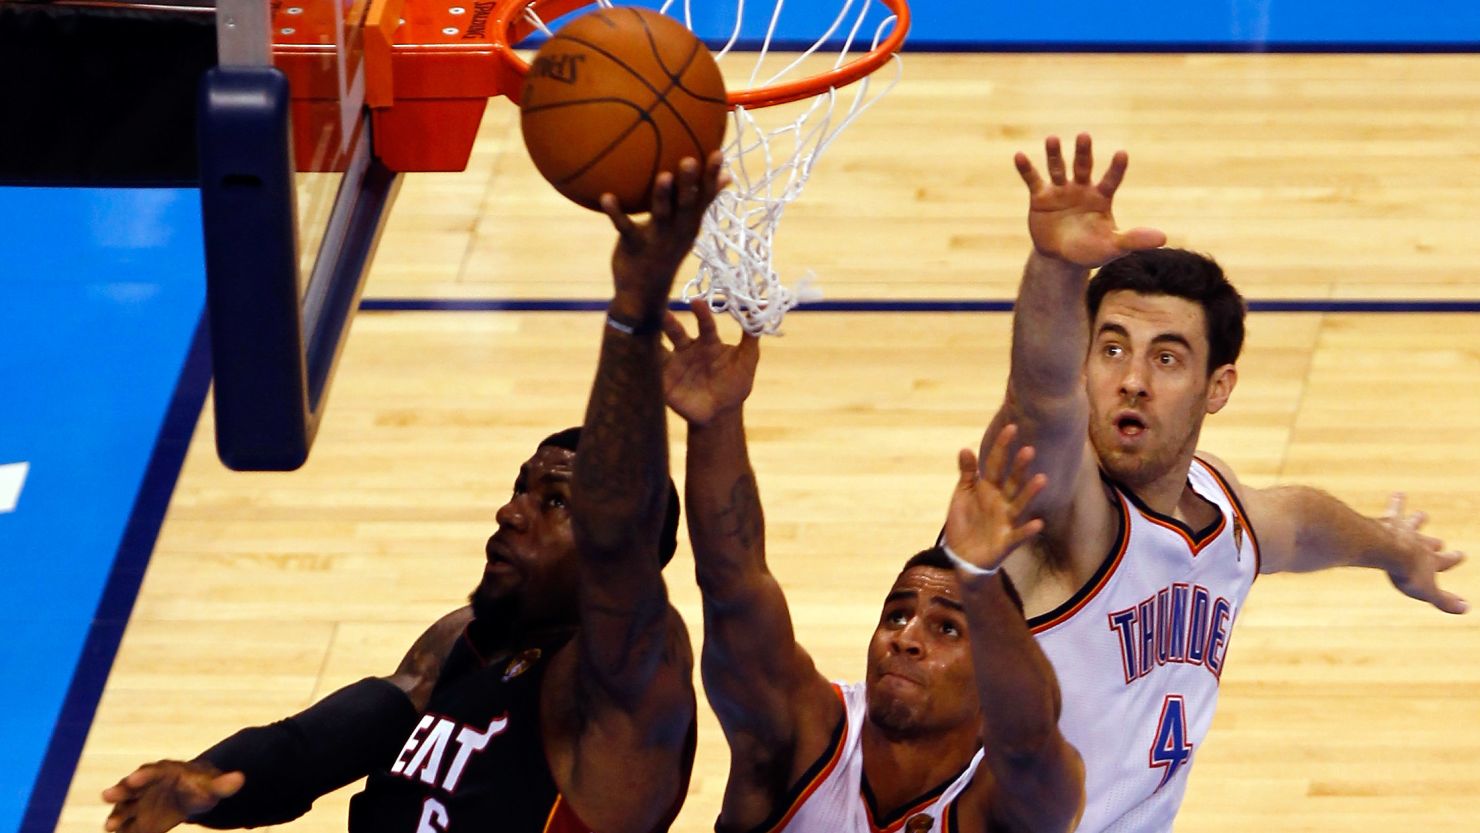 The Miami Heat's LeBron James goes up for a shot against Oklahoma City's Nick Collison and Thabo Sefolosha during Game 2 of the 2012 NBA Finals. 